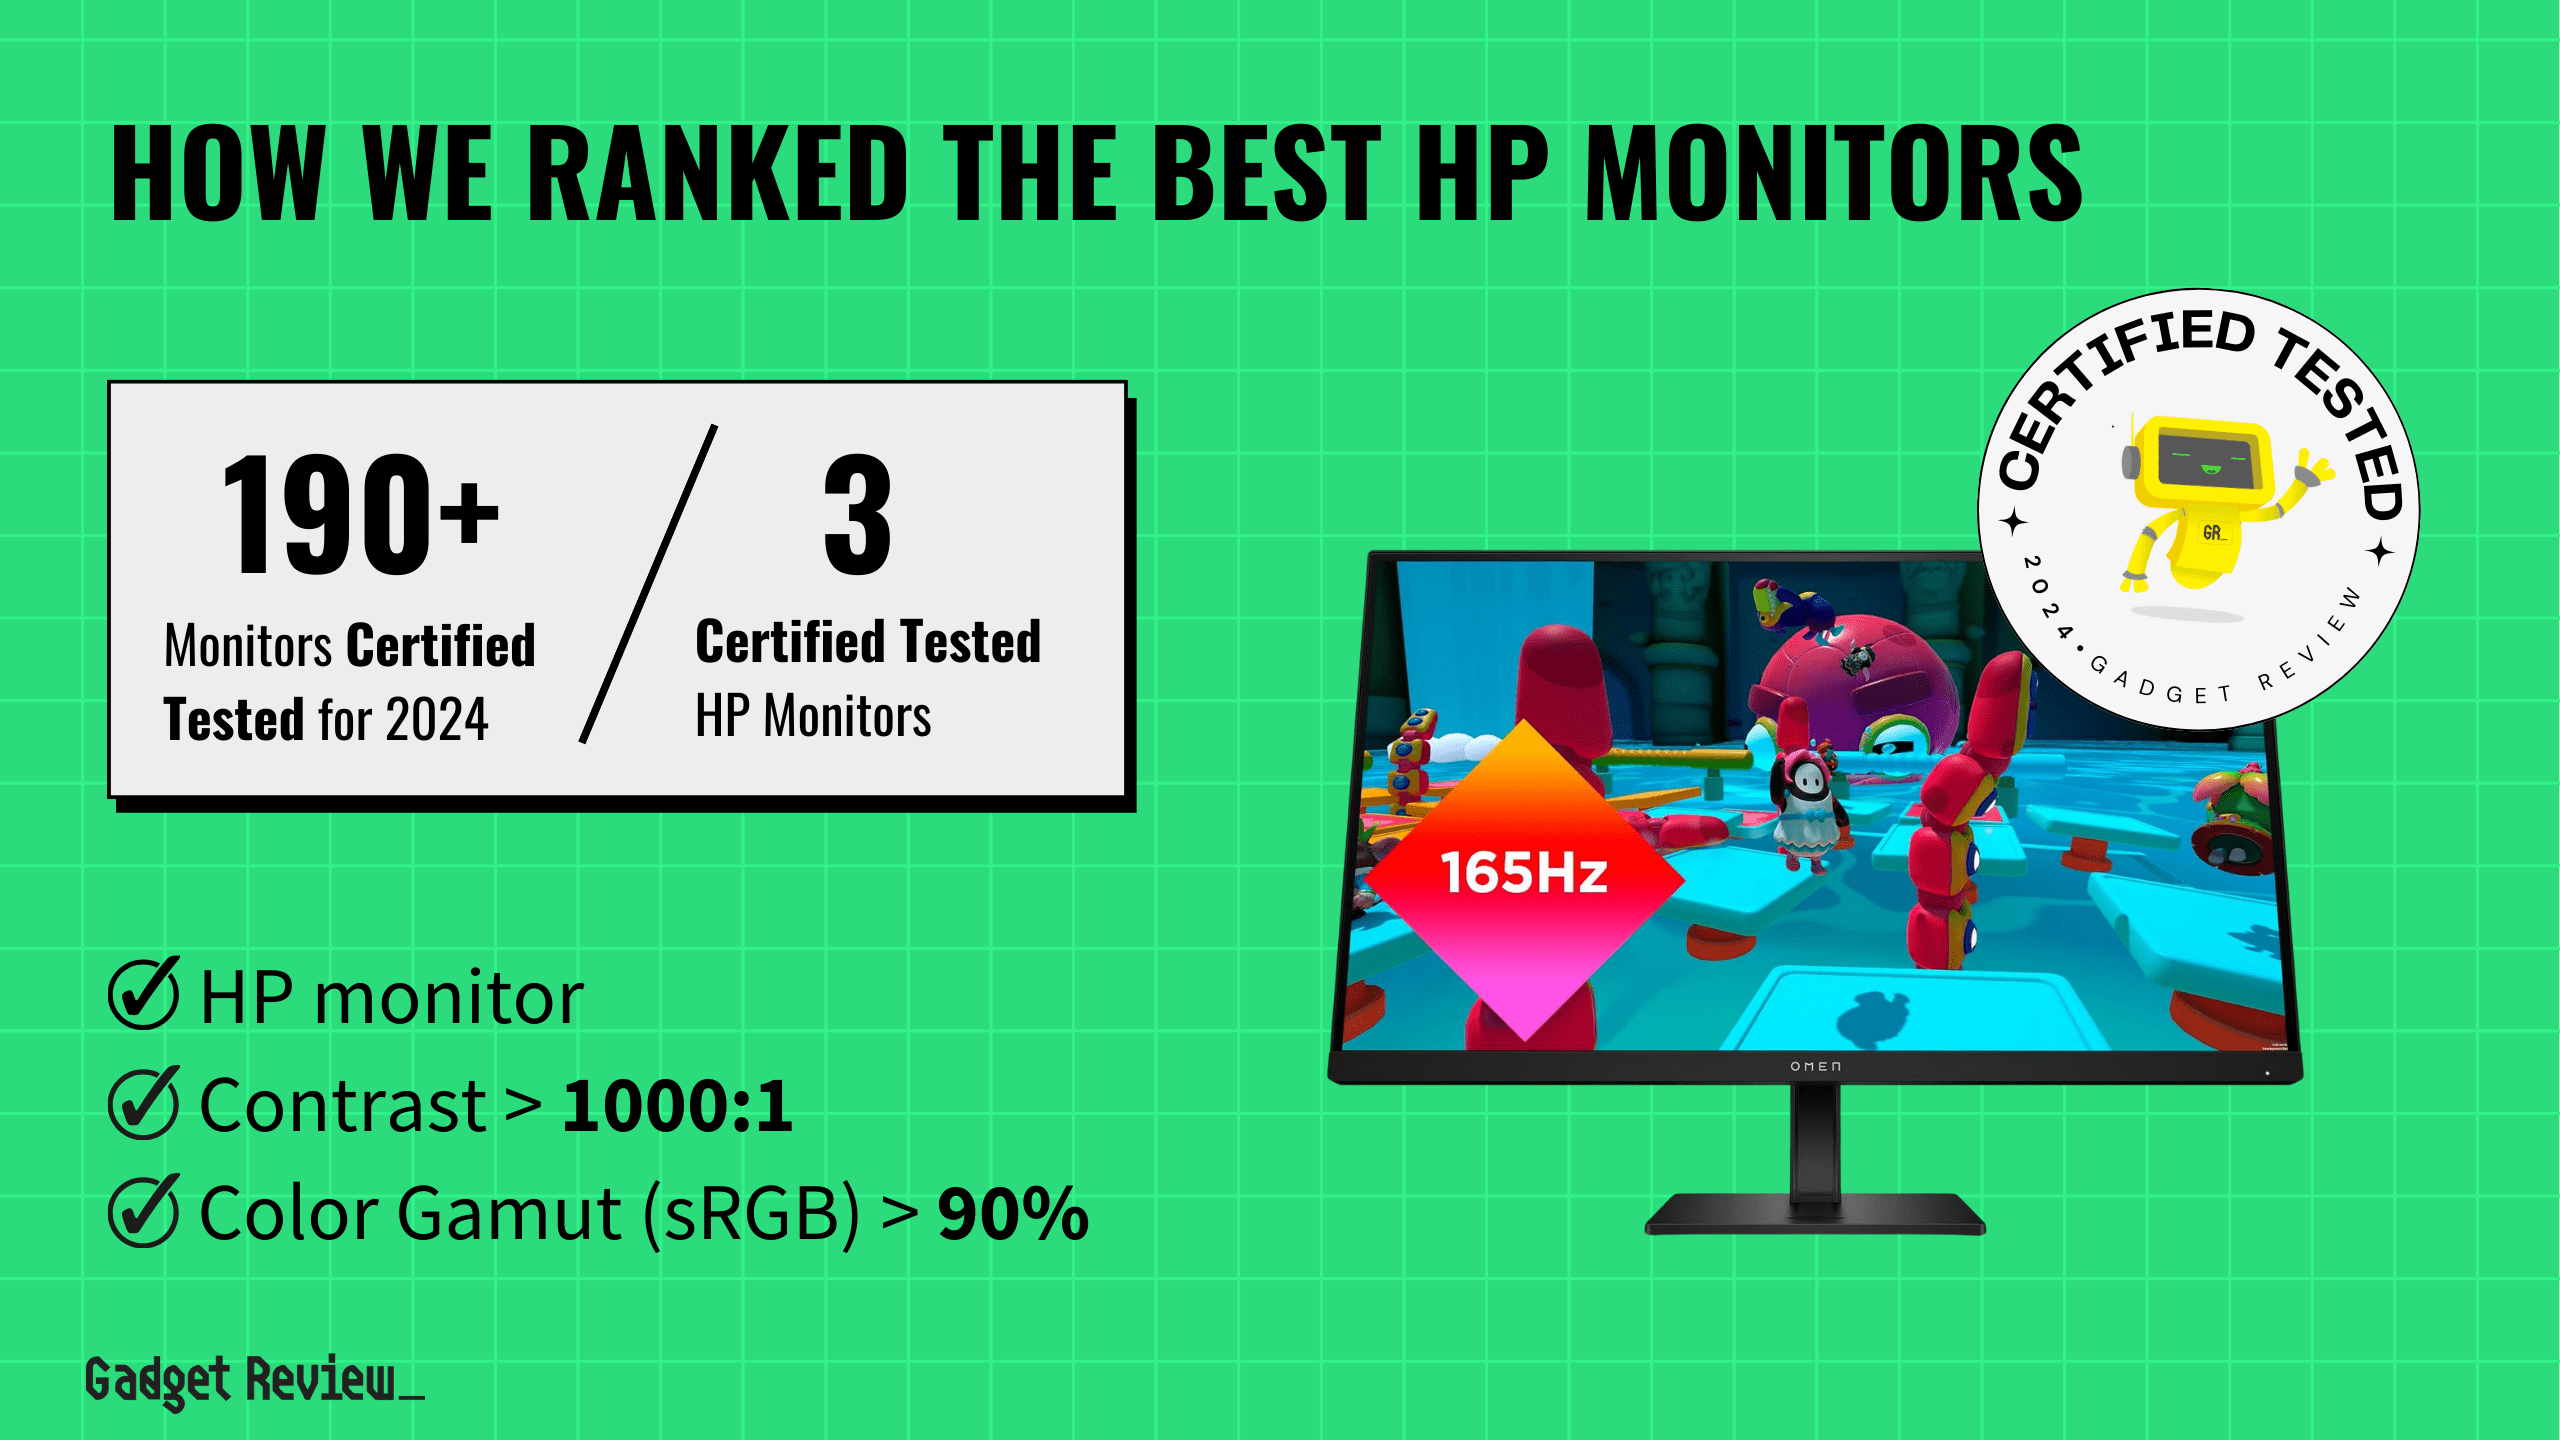 best hp monitor guide that shows the top best computer monitor model